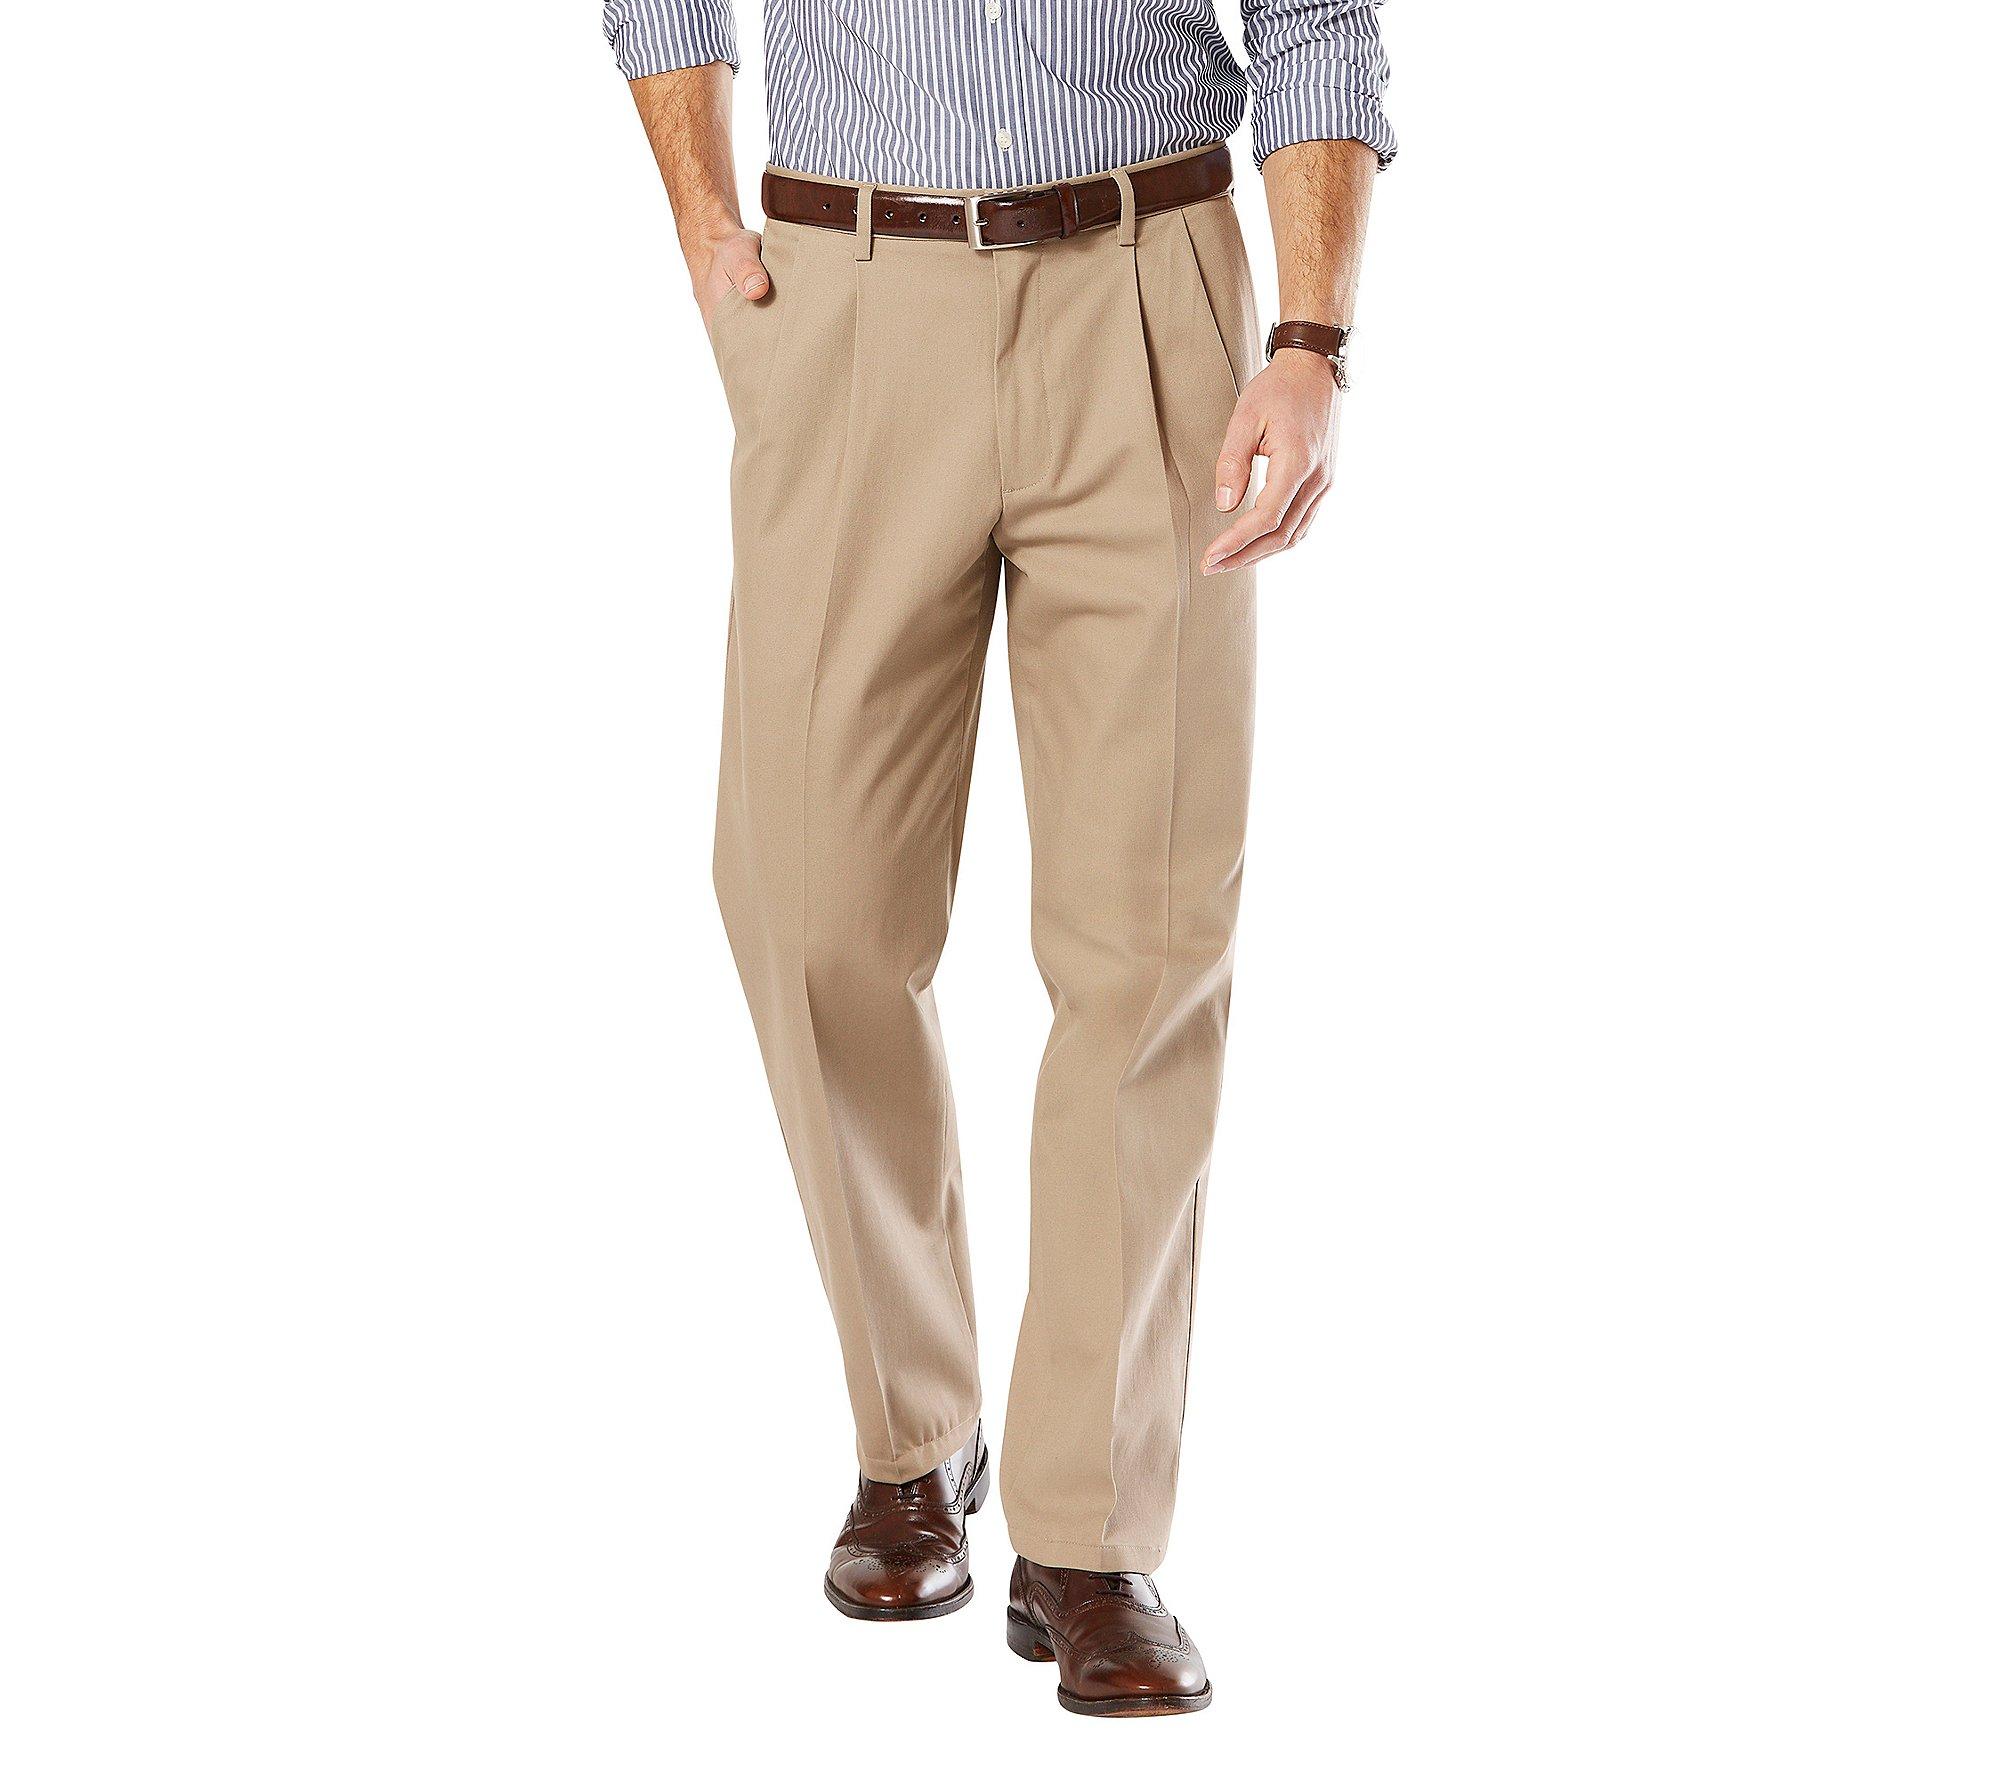 Dockers Signature Khaki Classic-fit Pleated Pant in Natural for Men - Lyst